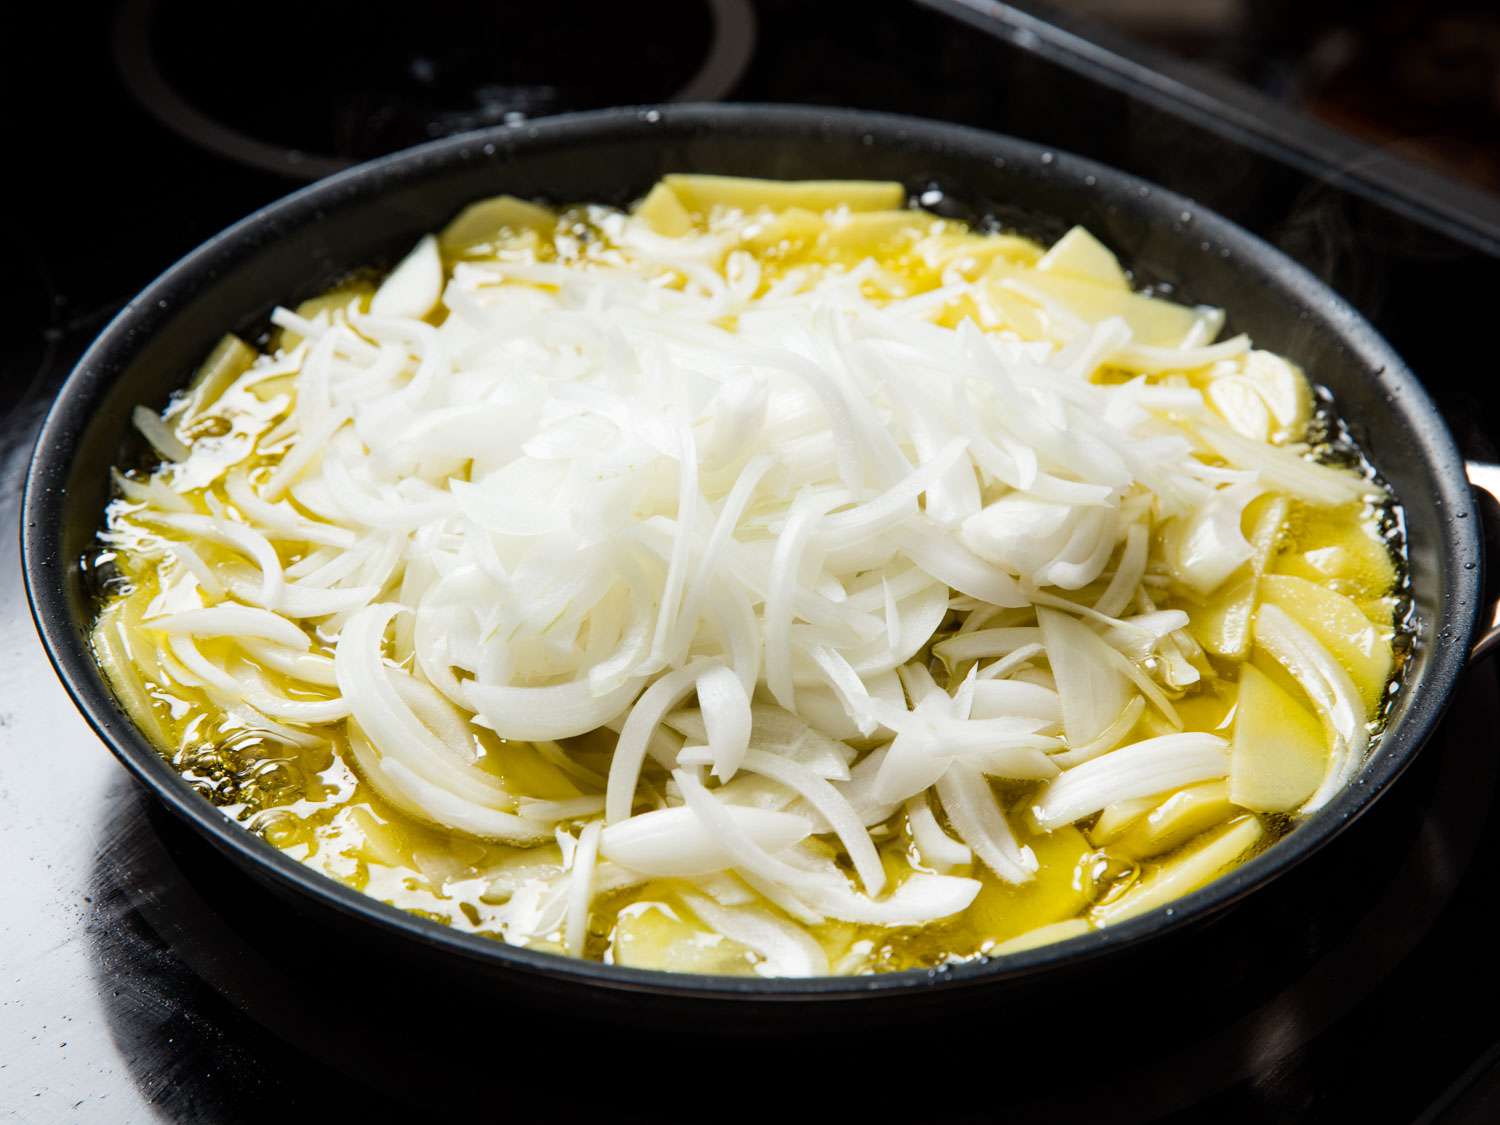 Frying sliced potatoes and onions in a skillet for tortilla española.